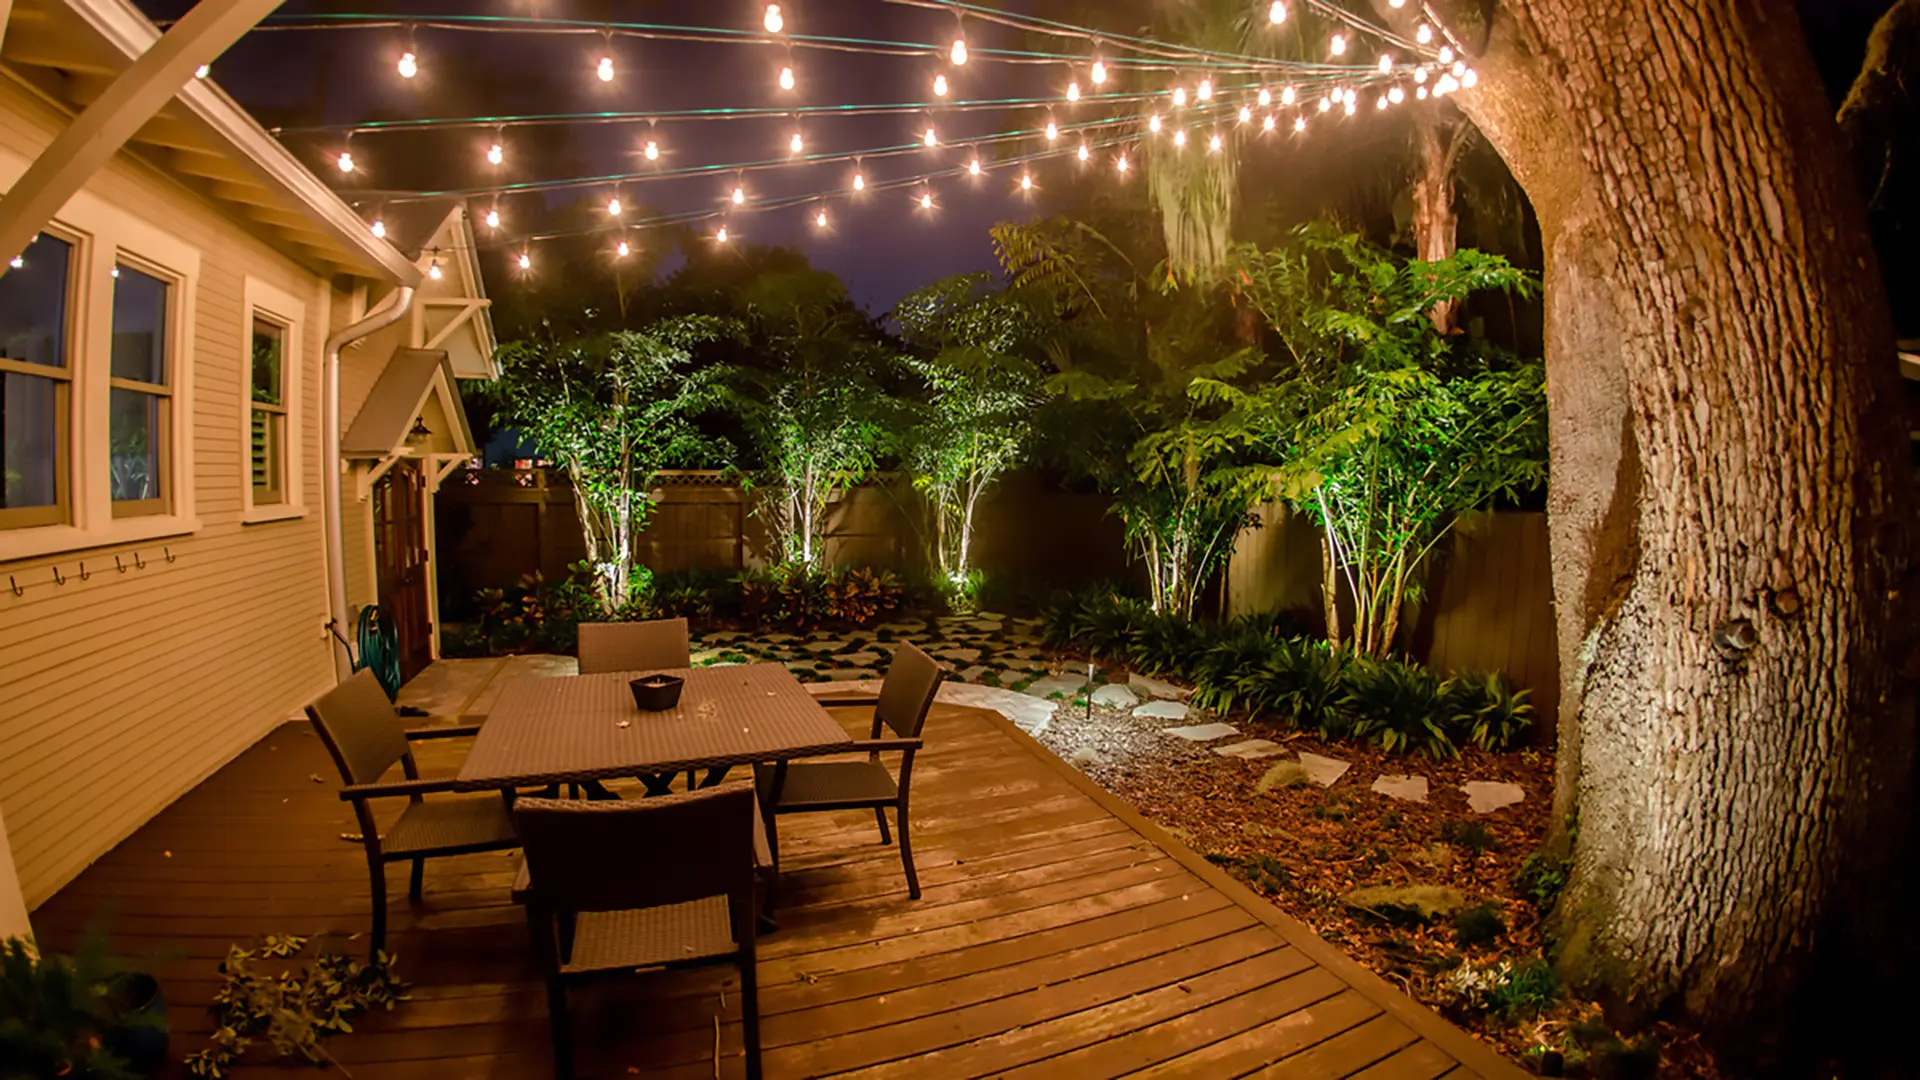 3 Helpful DIY Ideas To Compliment Your Outdoor Lighting